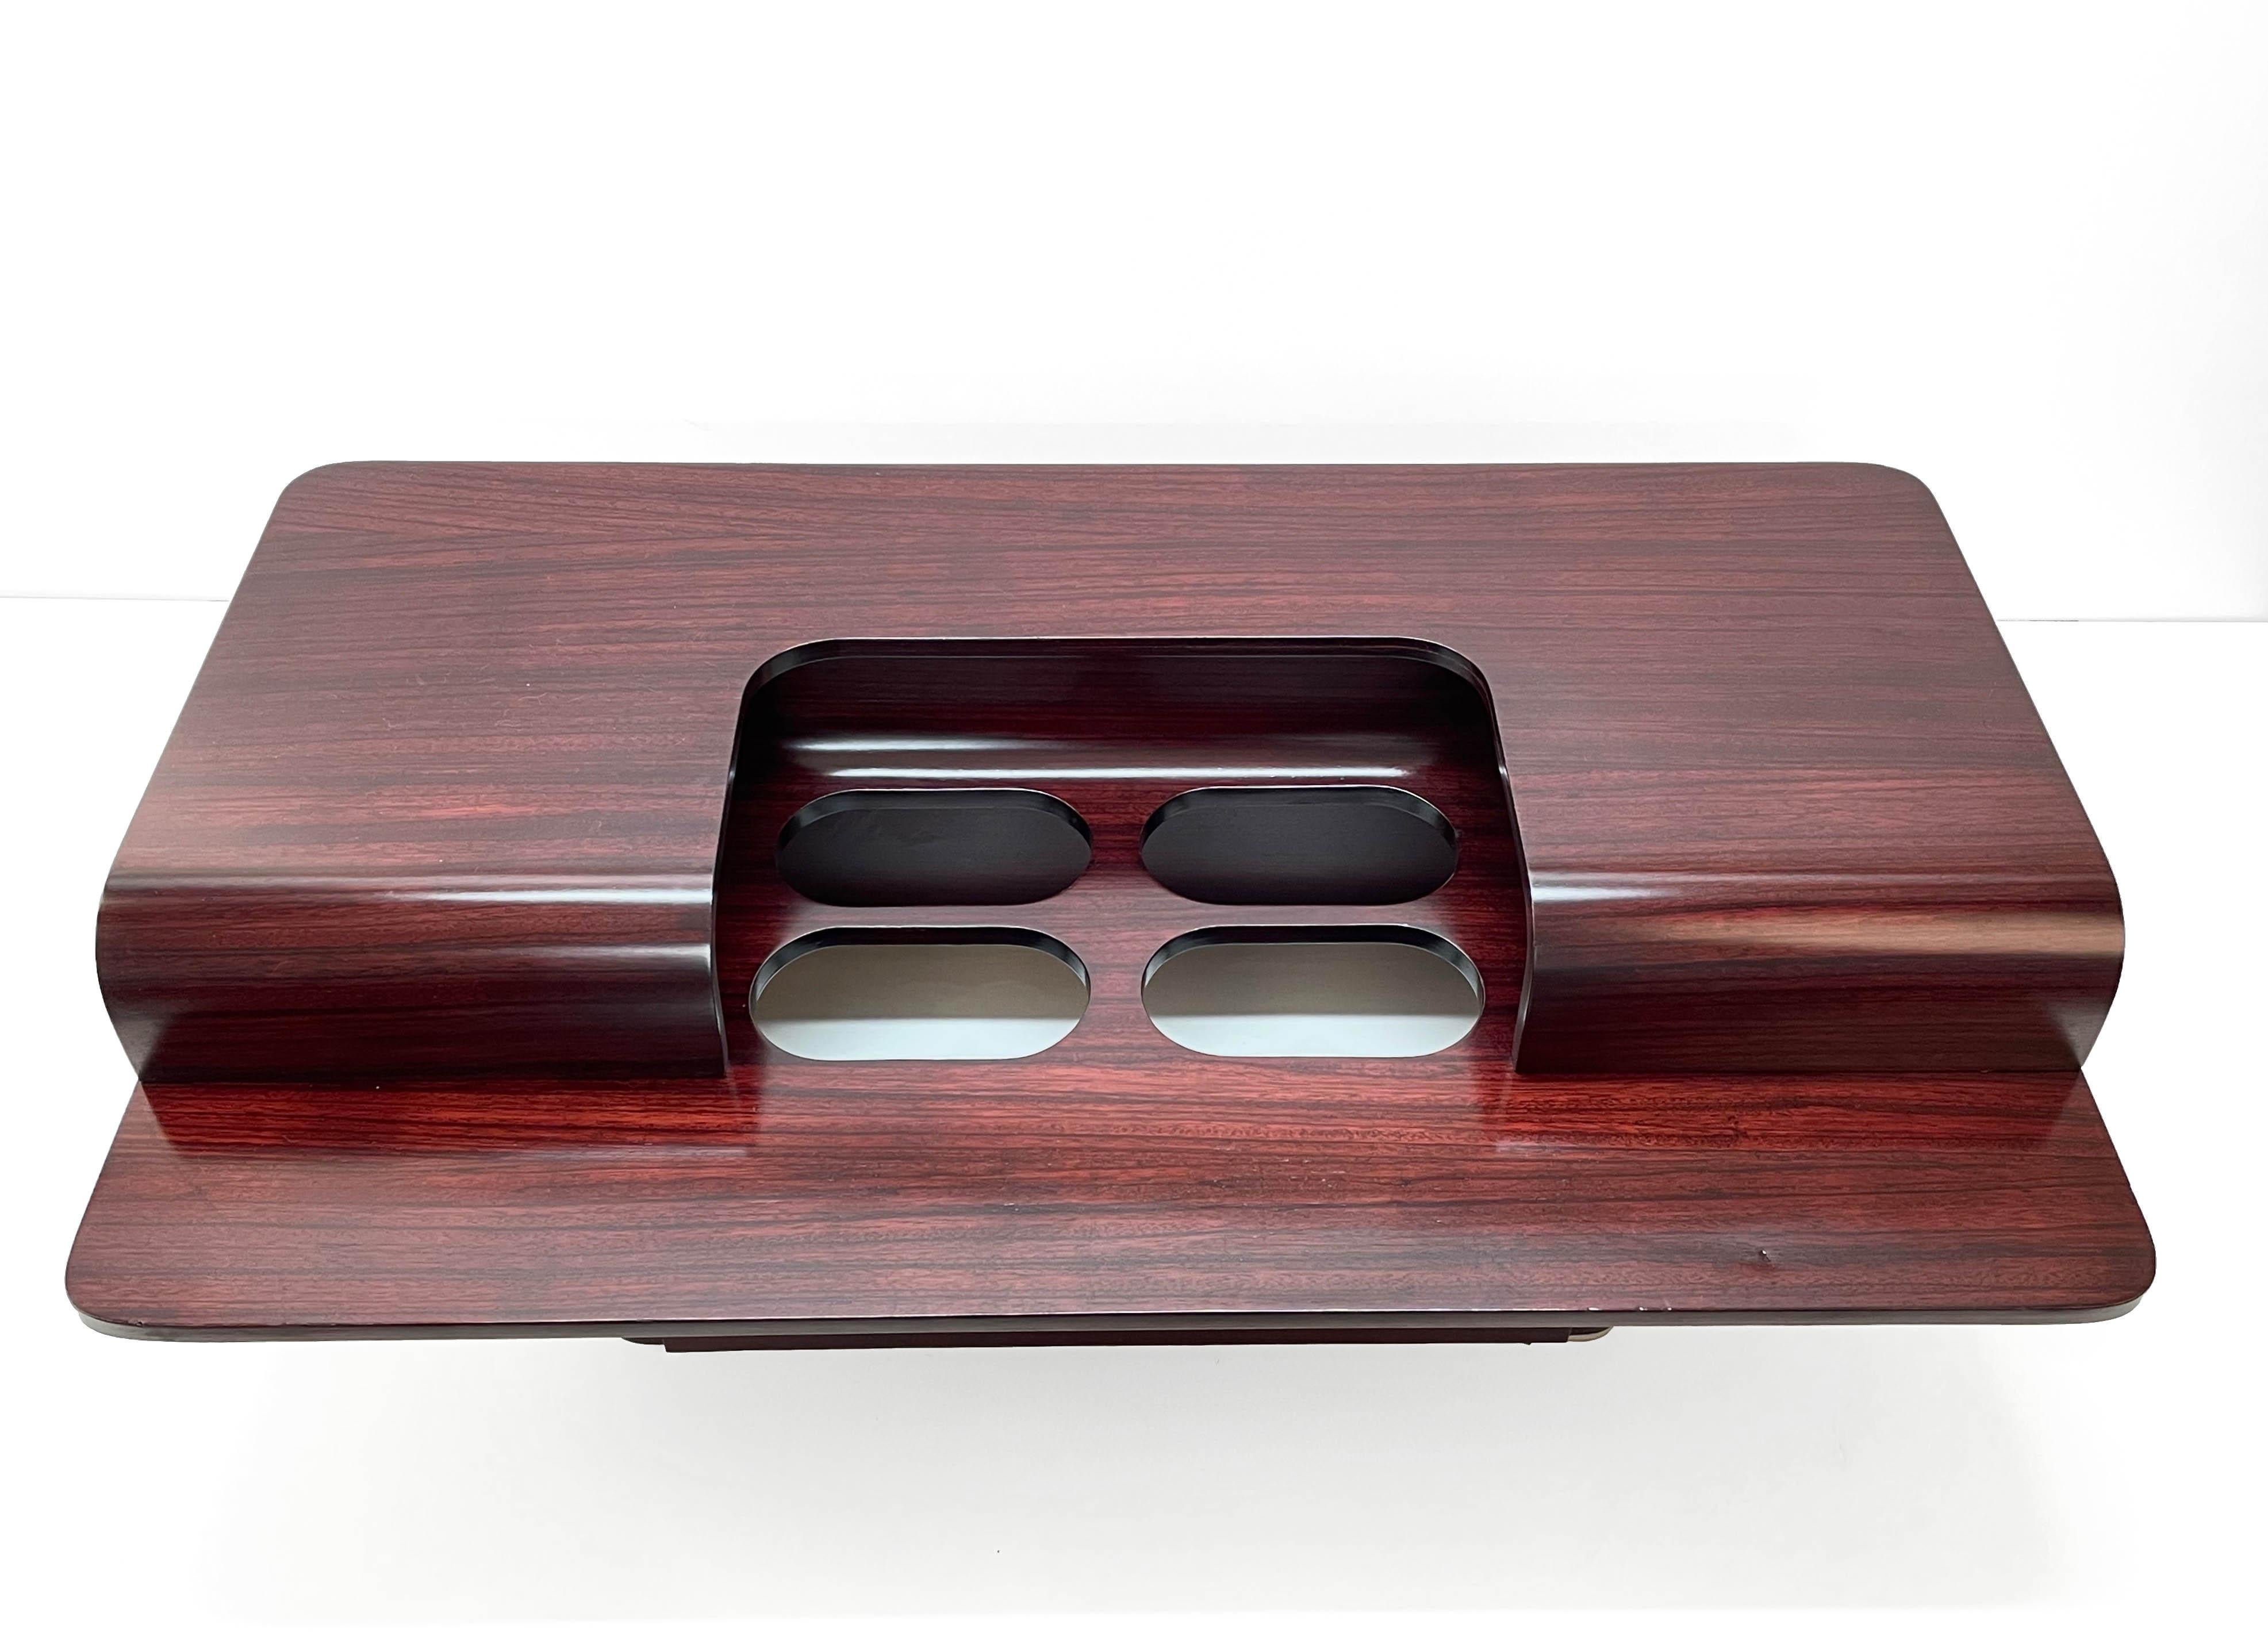 Mid-Century Modern Midcentury Italian Dark Brown Wooden Coffee Table with Bottle Holders, 1970s For Sale